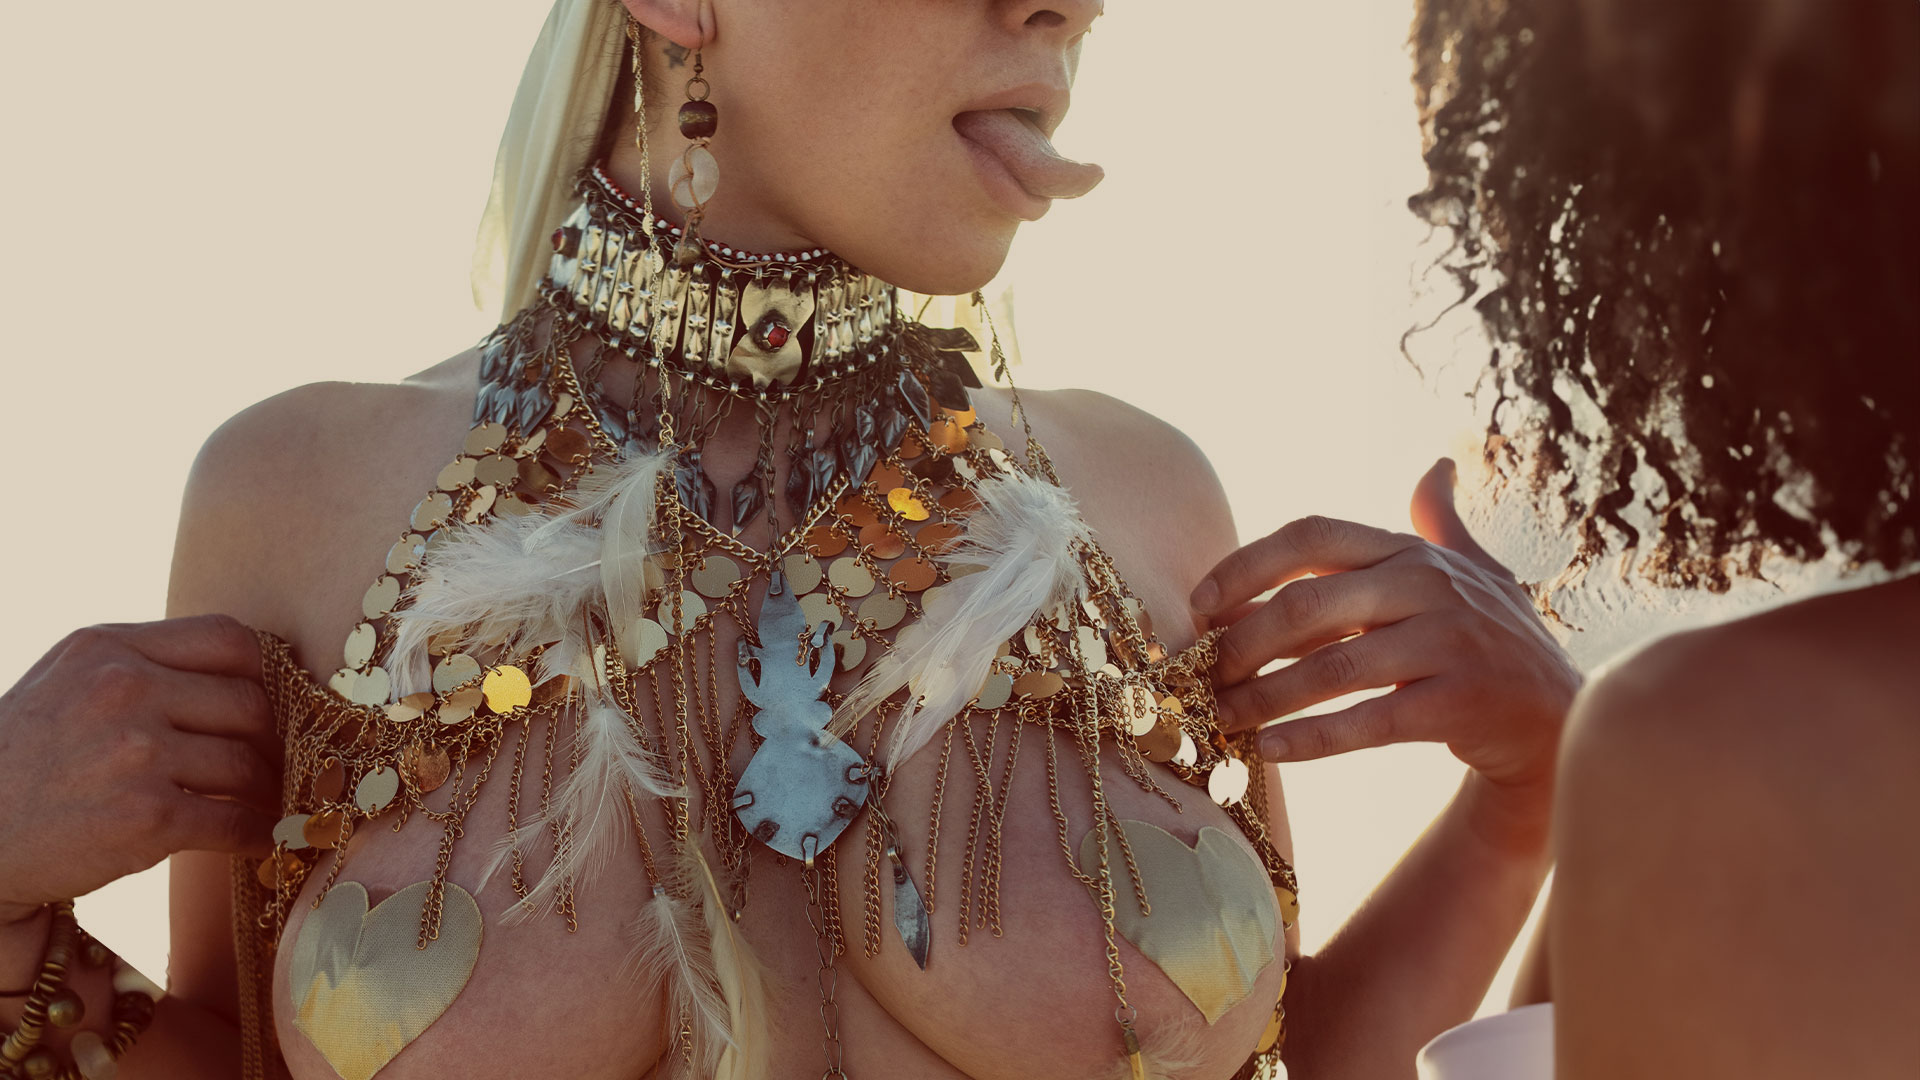 The Spiritual Side of Burning Man’s Infamous Orgy Dome